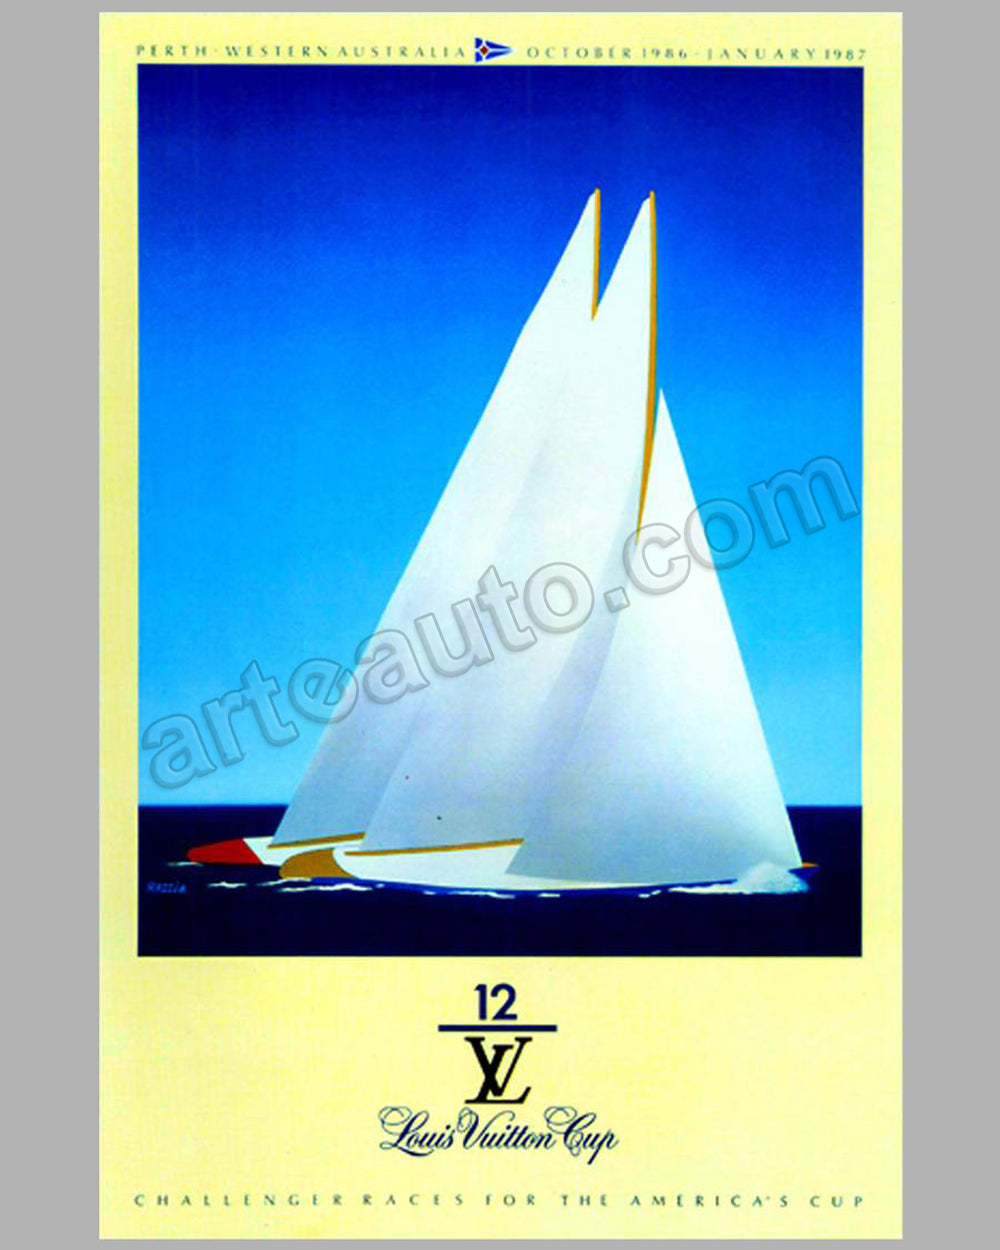 Louis Vuitton Cup Challenger races for the America’s cup large poster by Razzia 1986-1987